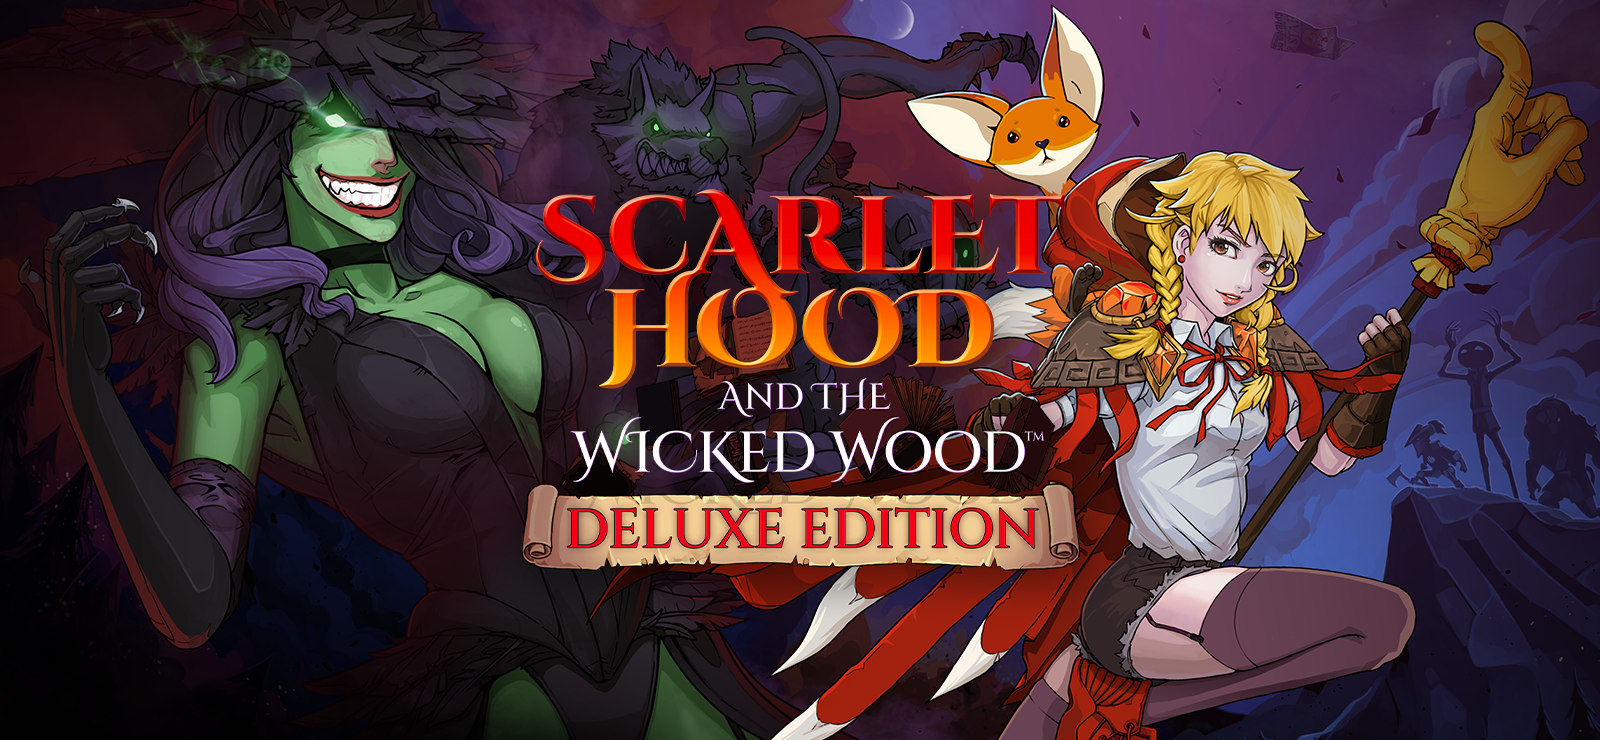 Scarlet Hood And The Wicked Wood - Deluxe Edition